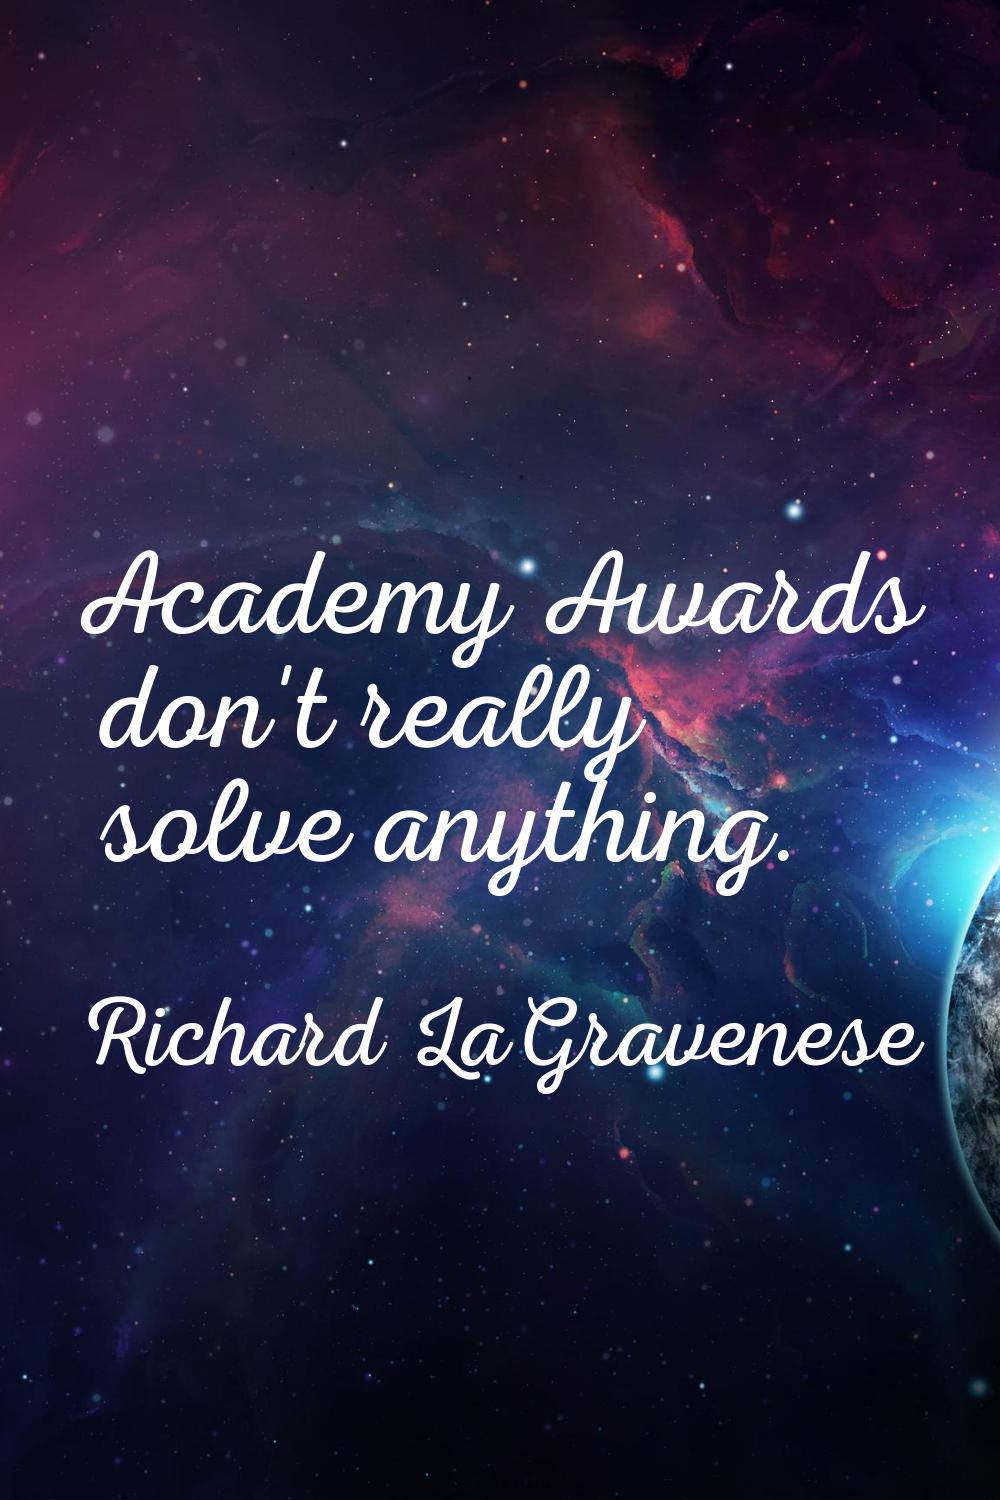 Academy Awards don't really solve anything.